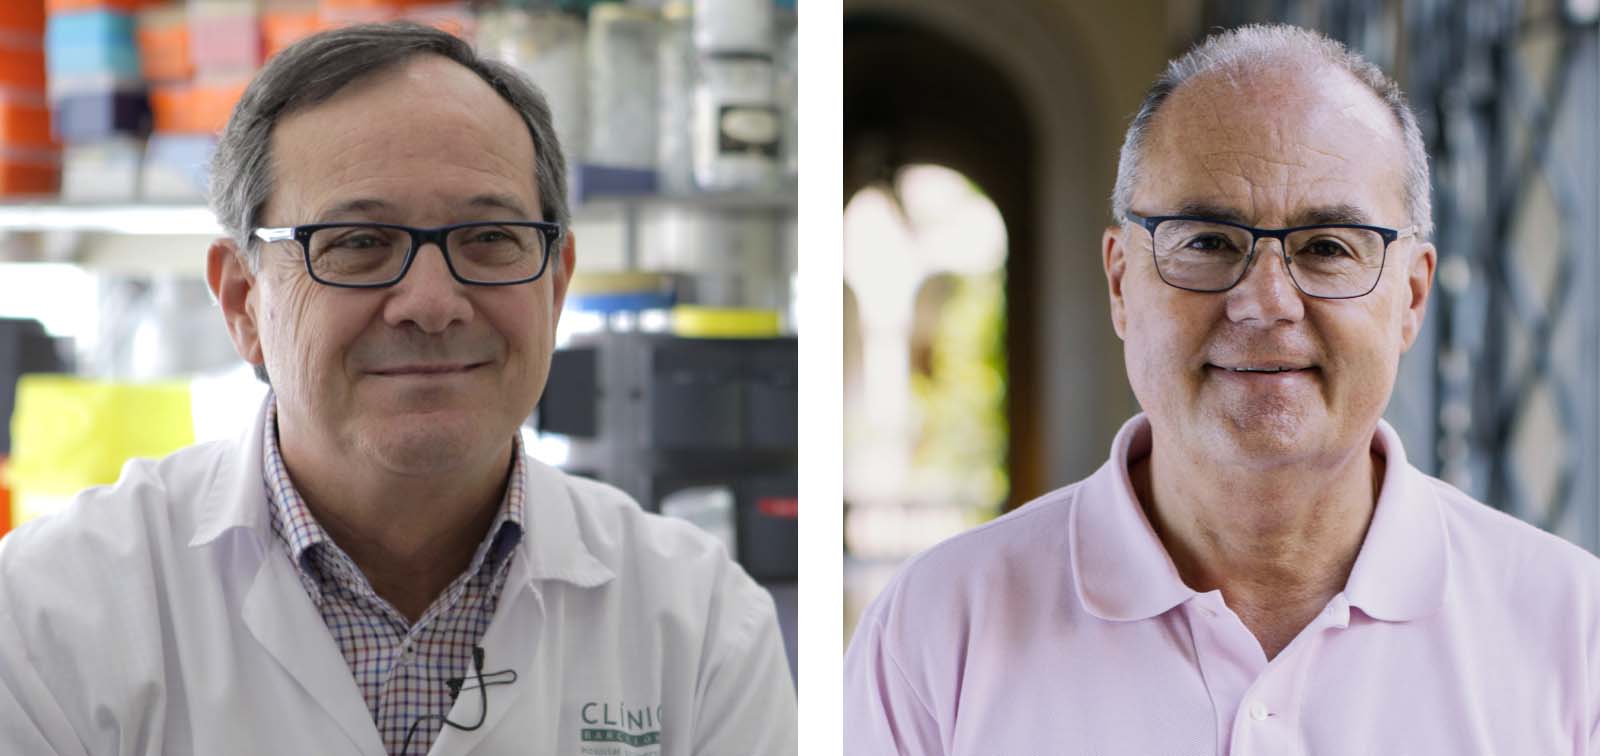 Jordi Vila is the new president of the SEIMC and Antoni Trilla, new dean of the Faculty of Medicine of the University of Barcelona